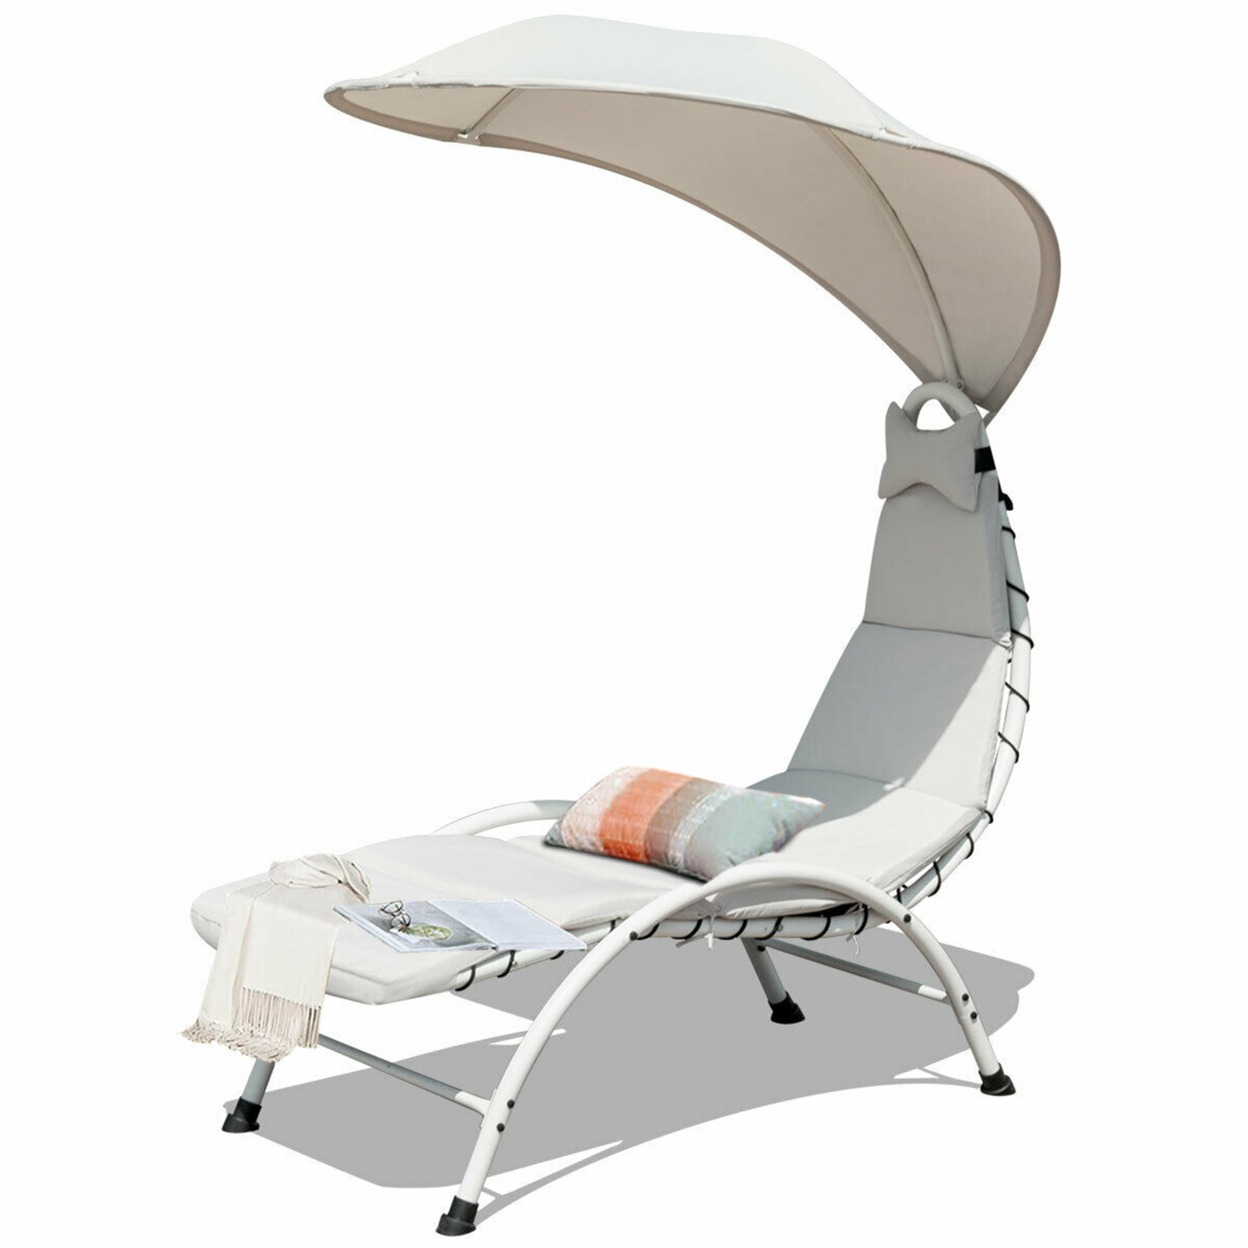 Patio Lounge Chair Chaise Outdoor W/ Steel Frame Cushion Canopy Beige